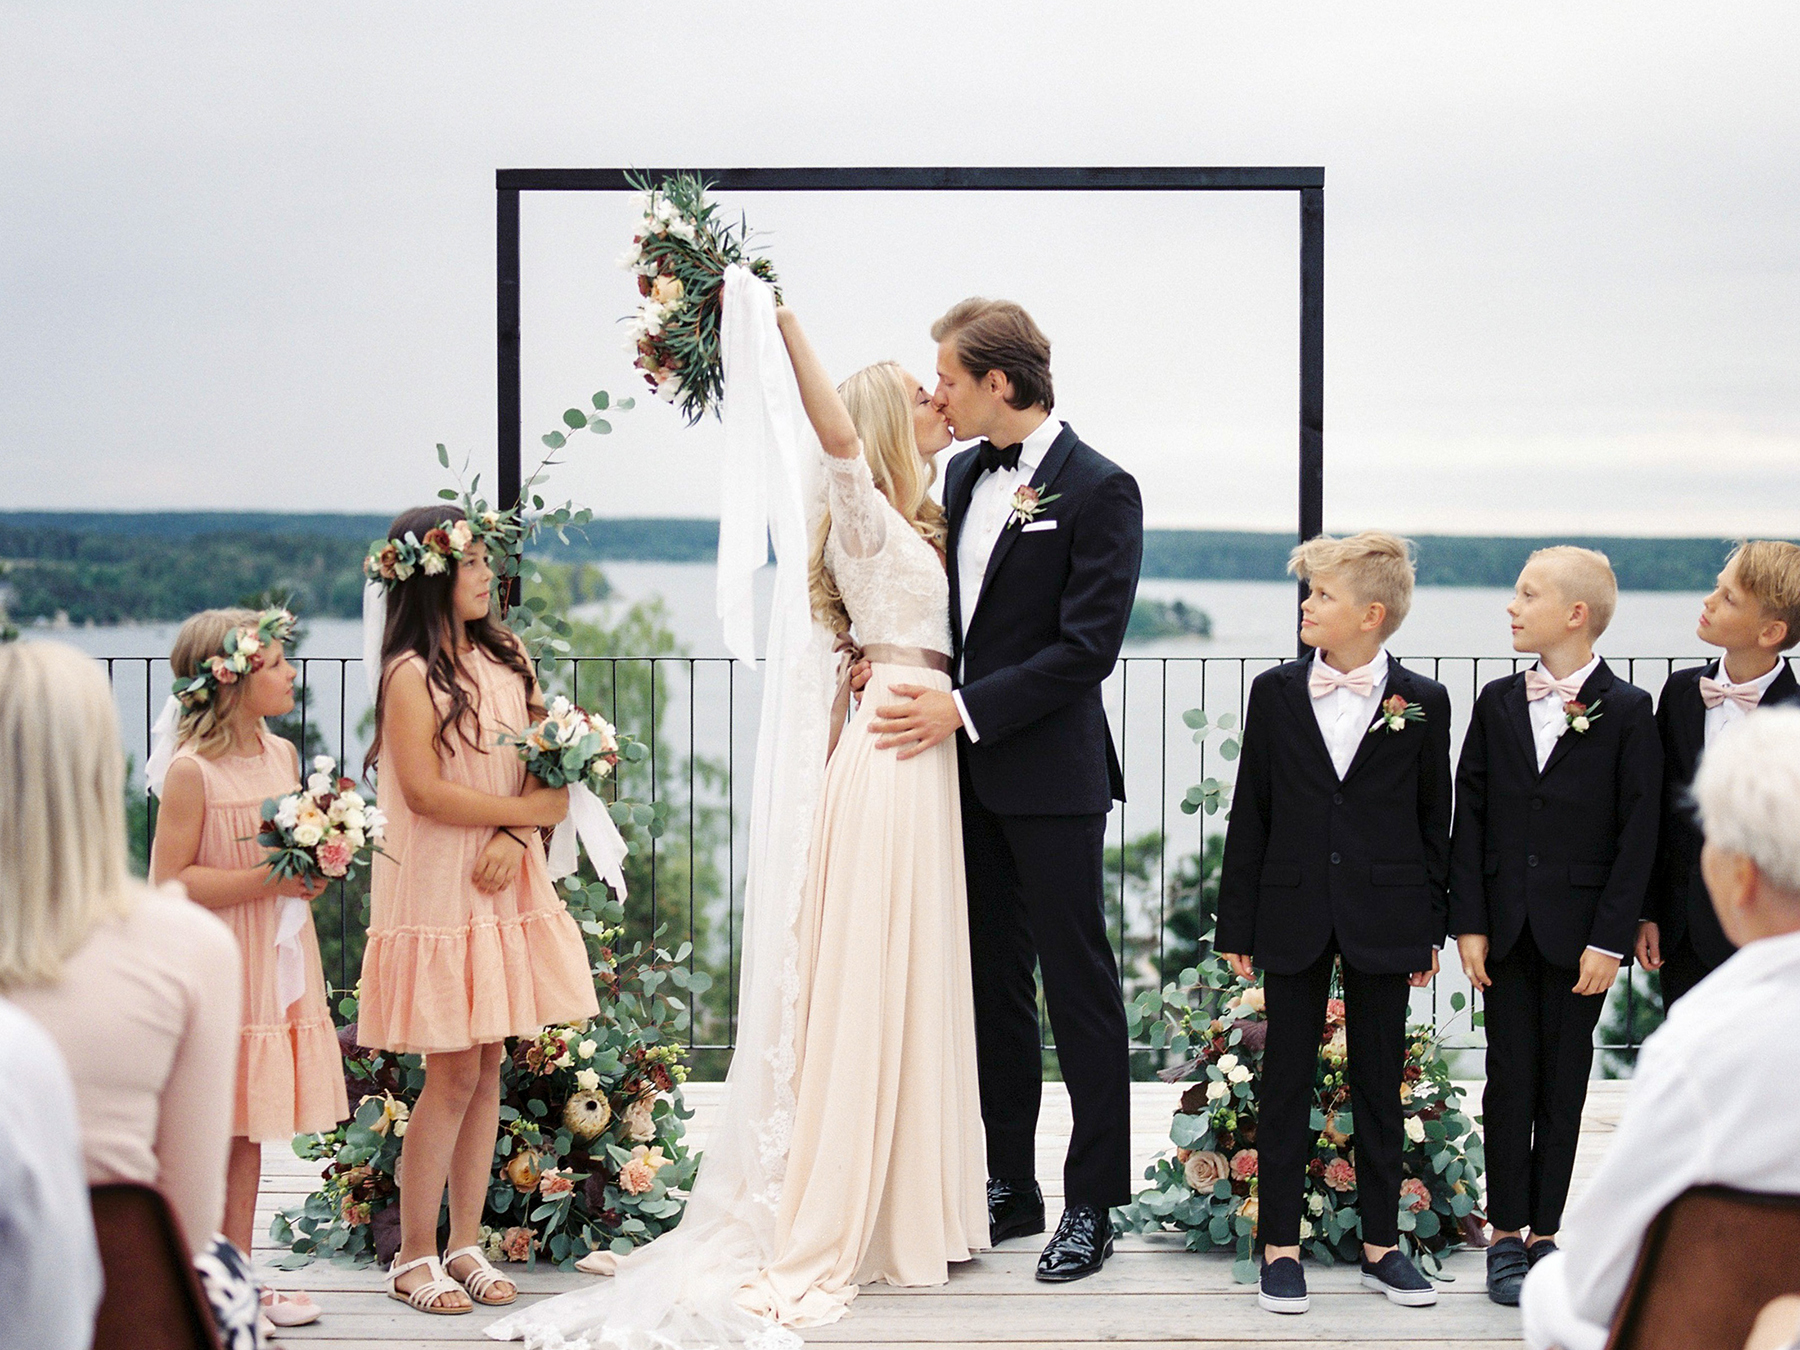 Bright and Warm Colored Wedding Inspiration in Sweden 2 Brides Photography17